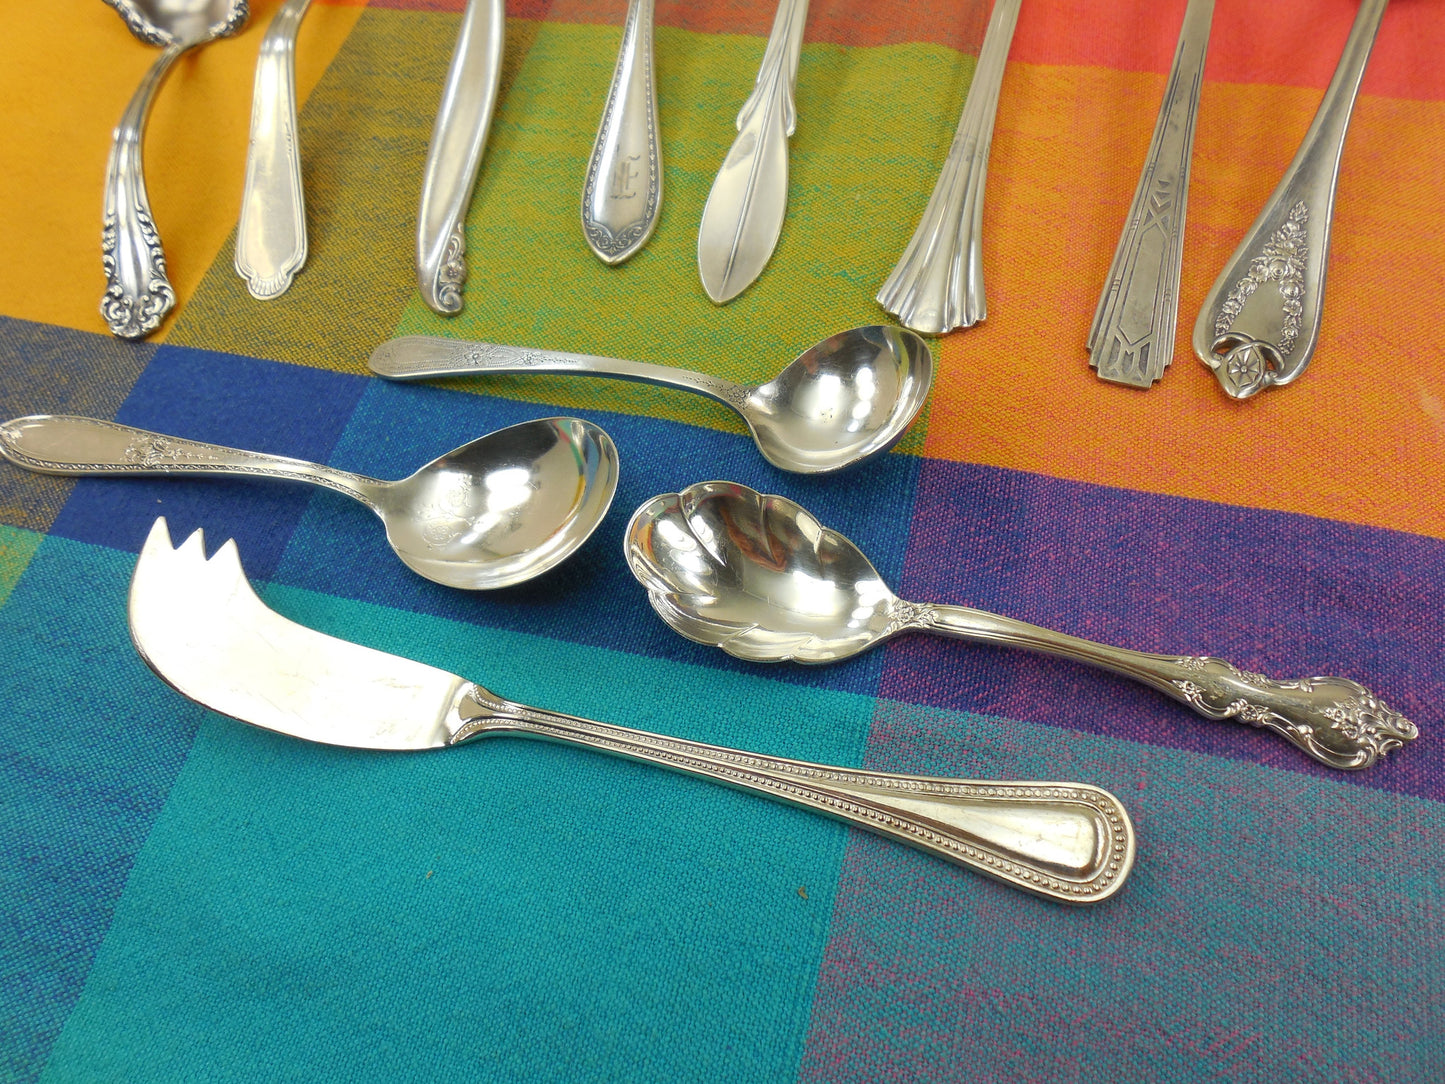 12 Piece Mismatched Serving Set - Shabby Cottage Elegant Floral Silverplate Flatware... Antique Silverware... cheese knife